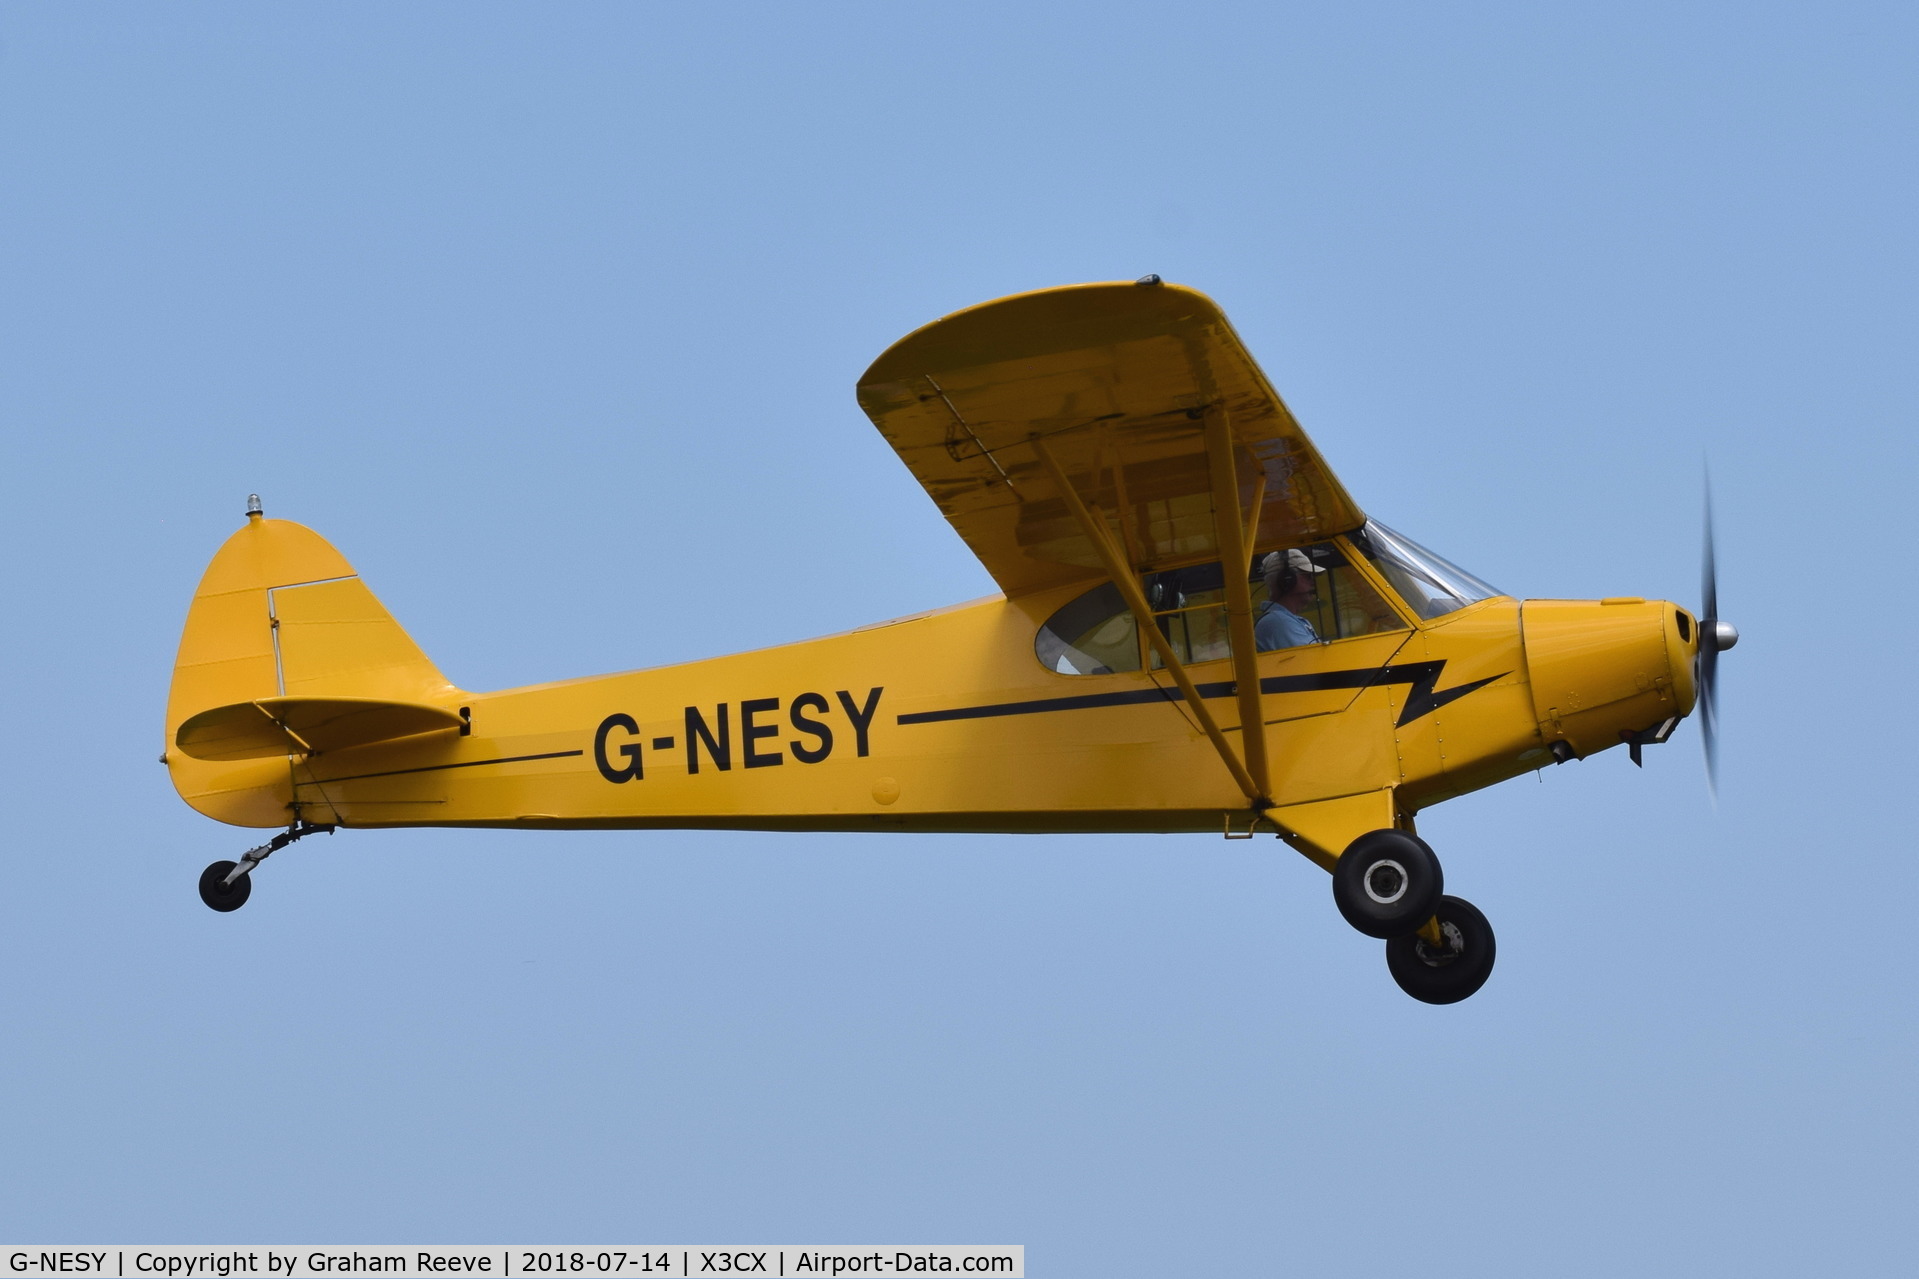 G-NESY, 1960 Piper PA-18 Super Cub C/N 18-7482, Departing from Northrepps.